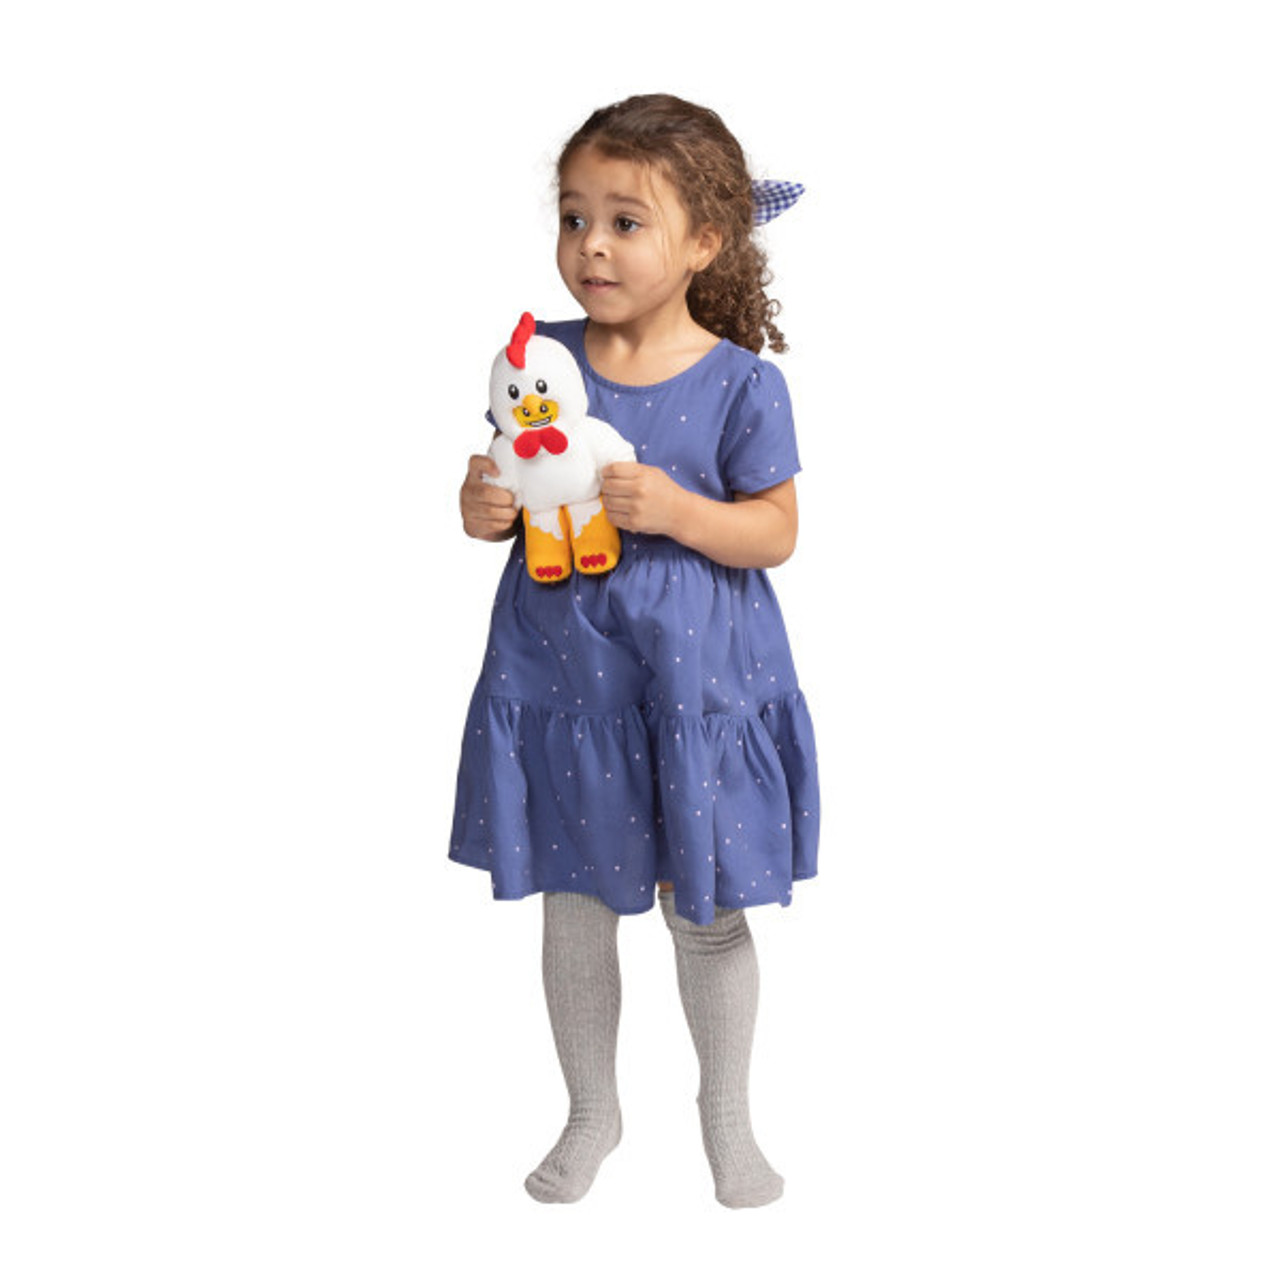 Girl playing with Small Lego Chicken Guy Plush, 22cm EAN 513345